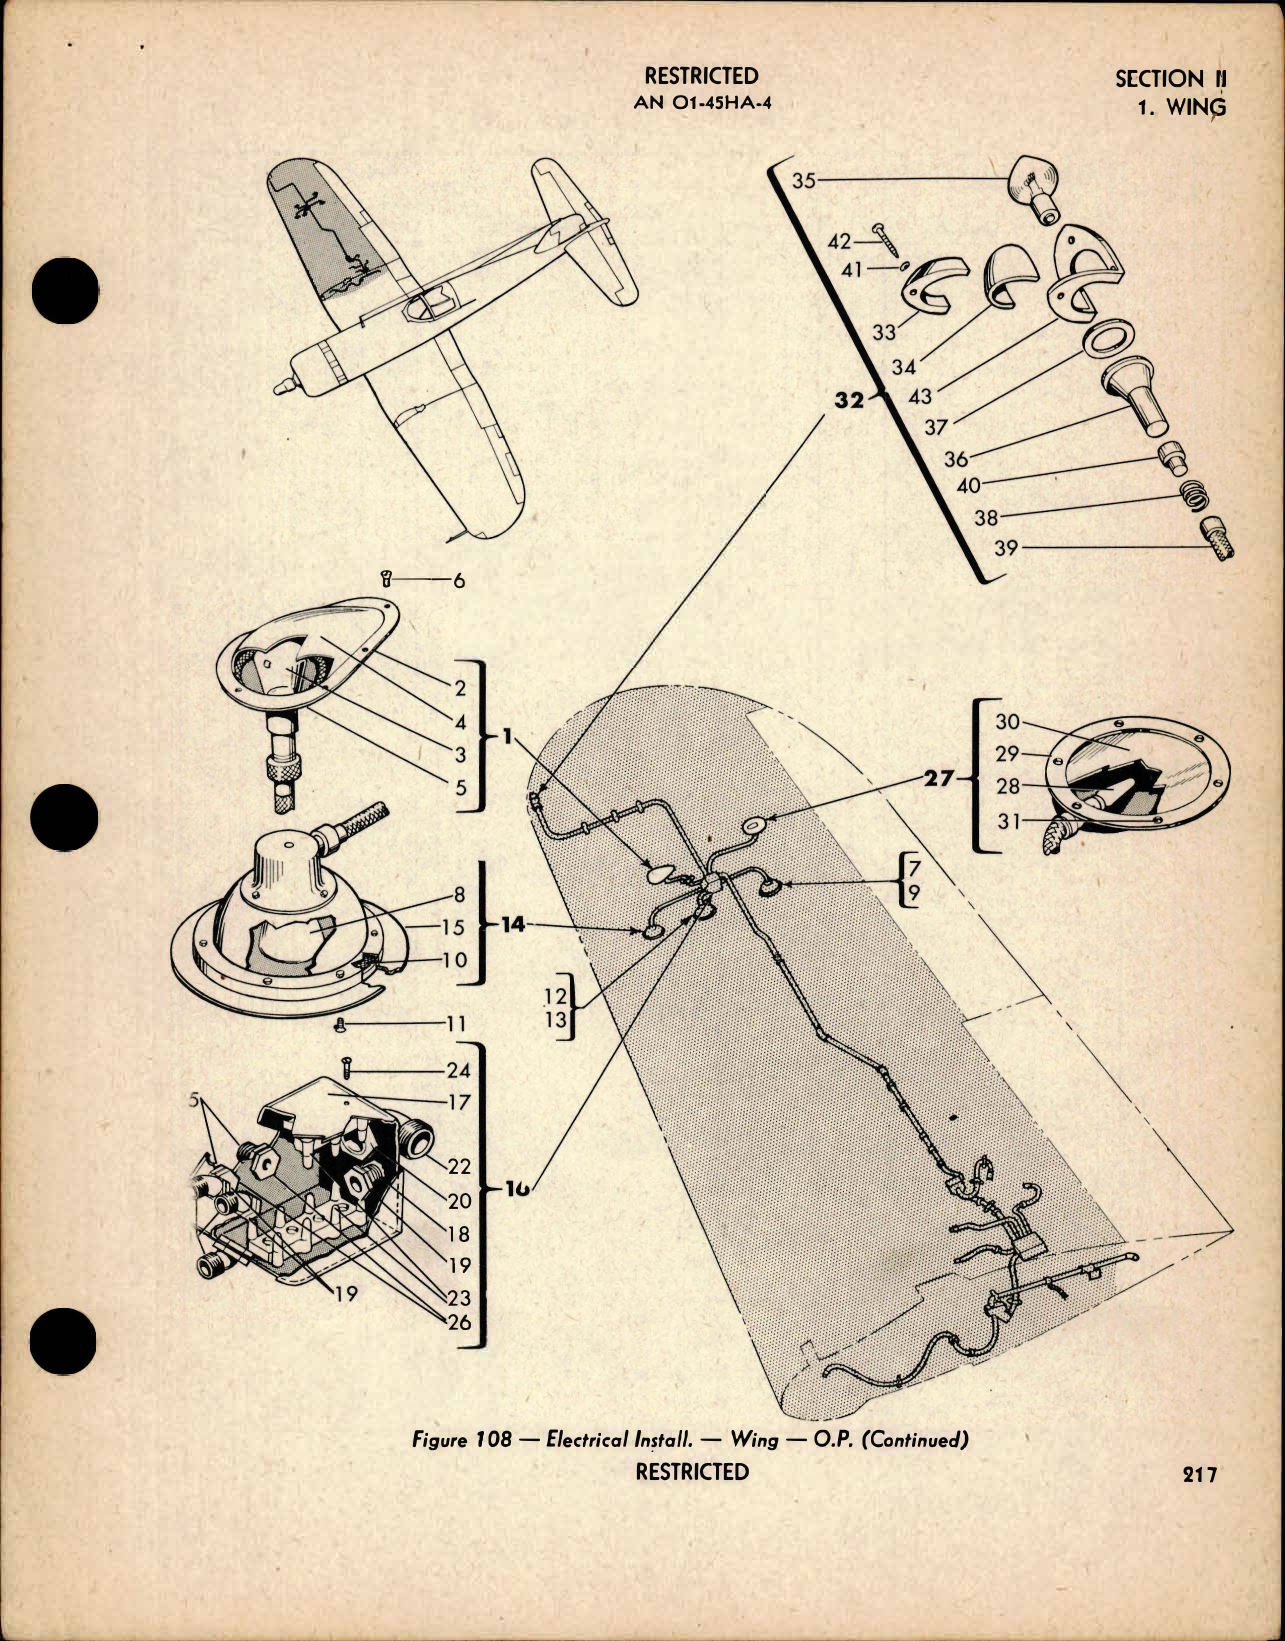 Sample page 5 from AirCorps Library document: Parts Catalog for Navy Models F4U-1, F3A-1, FG-1, and British Models Corsair I - II - III